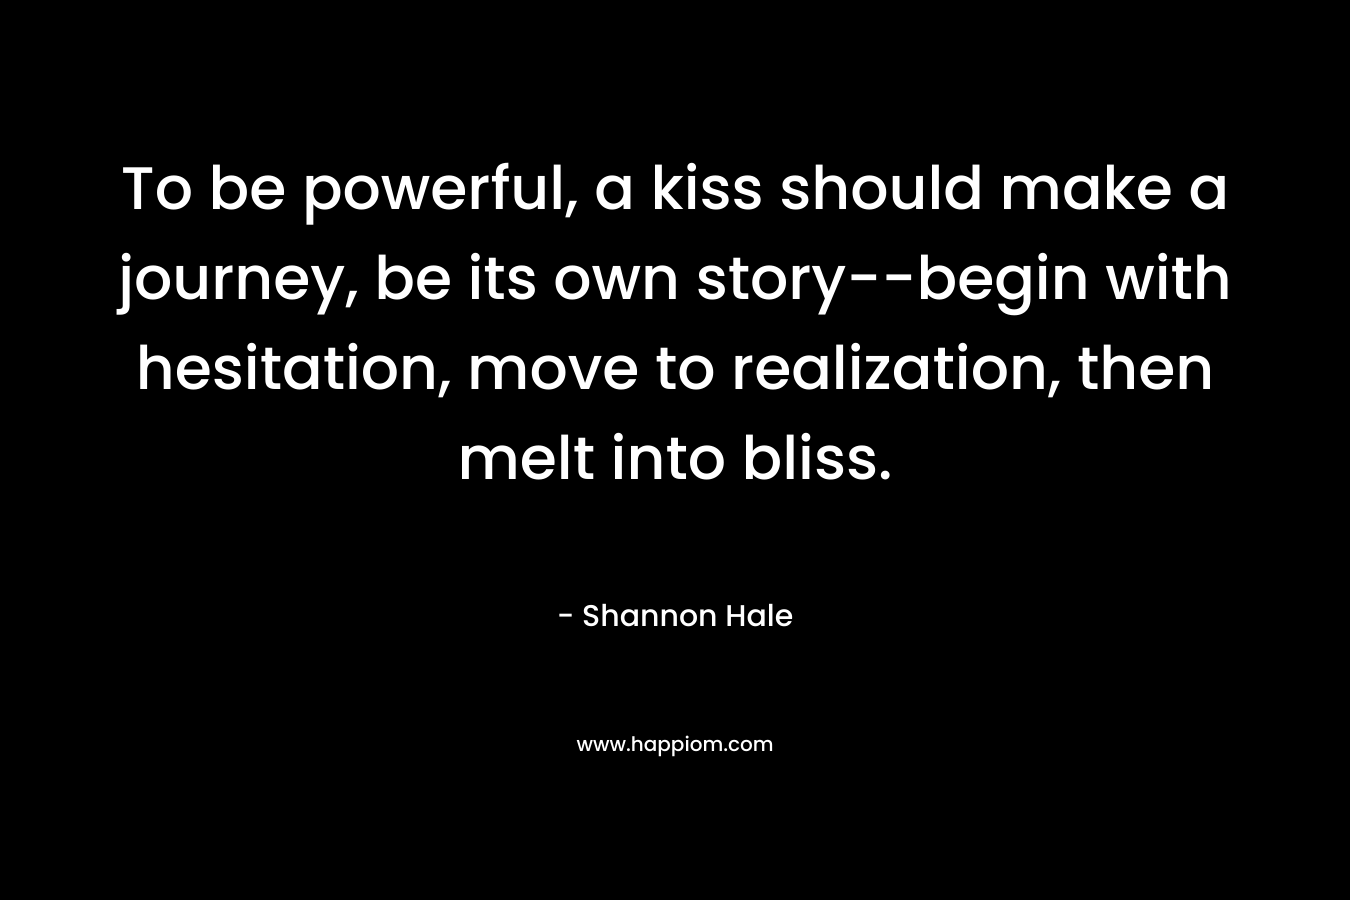 To be powerful, a kiss should make a journey, be its own story–begin with hesitation, move to realization, then melt into bliss. – Shannon Hale